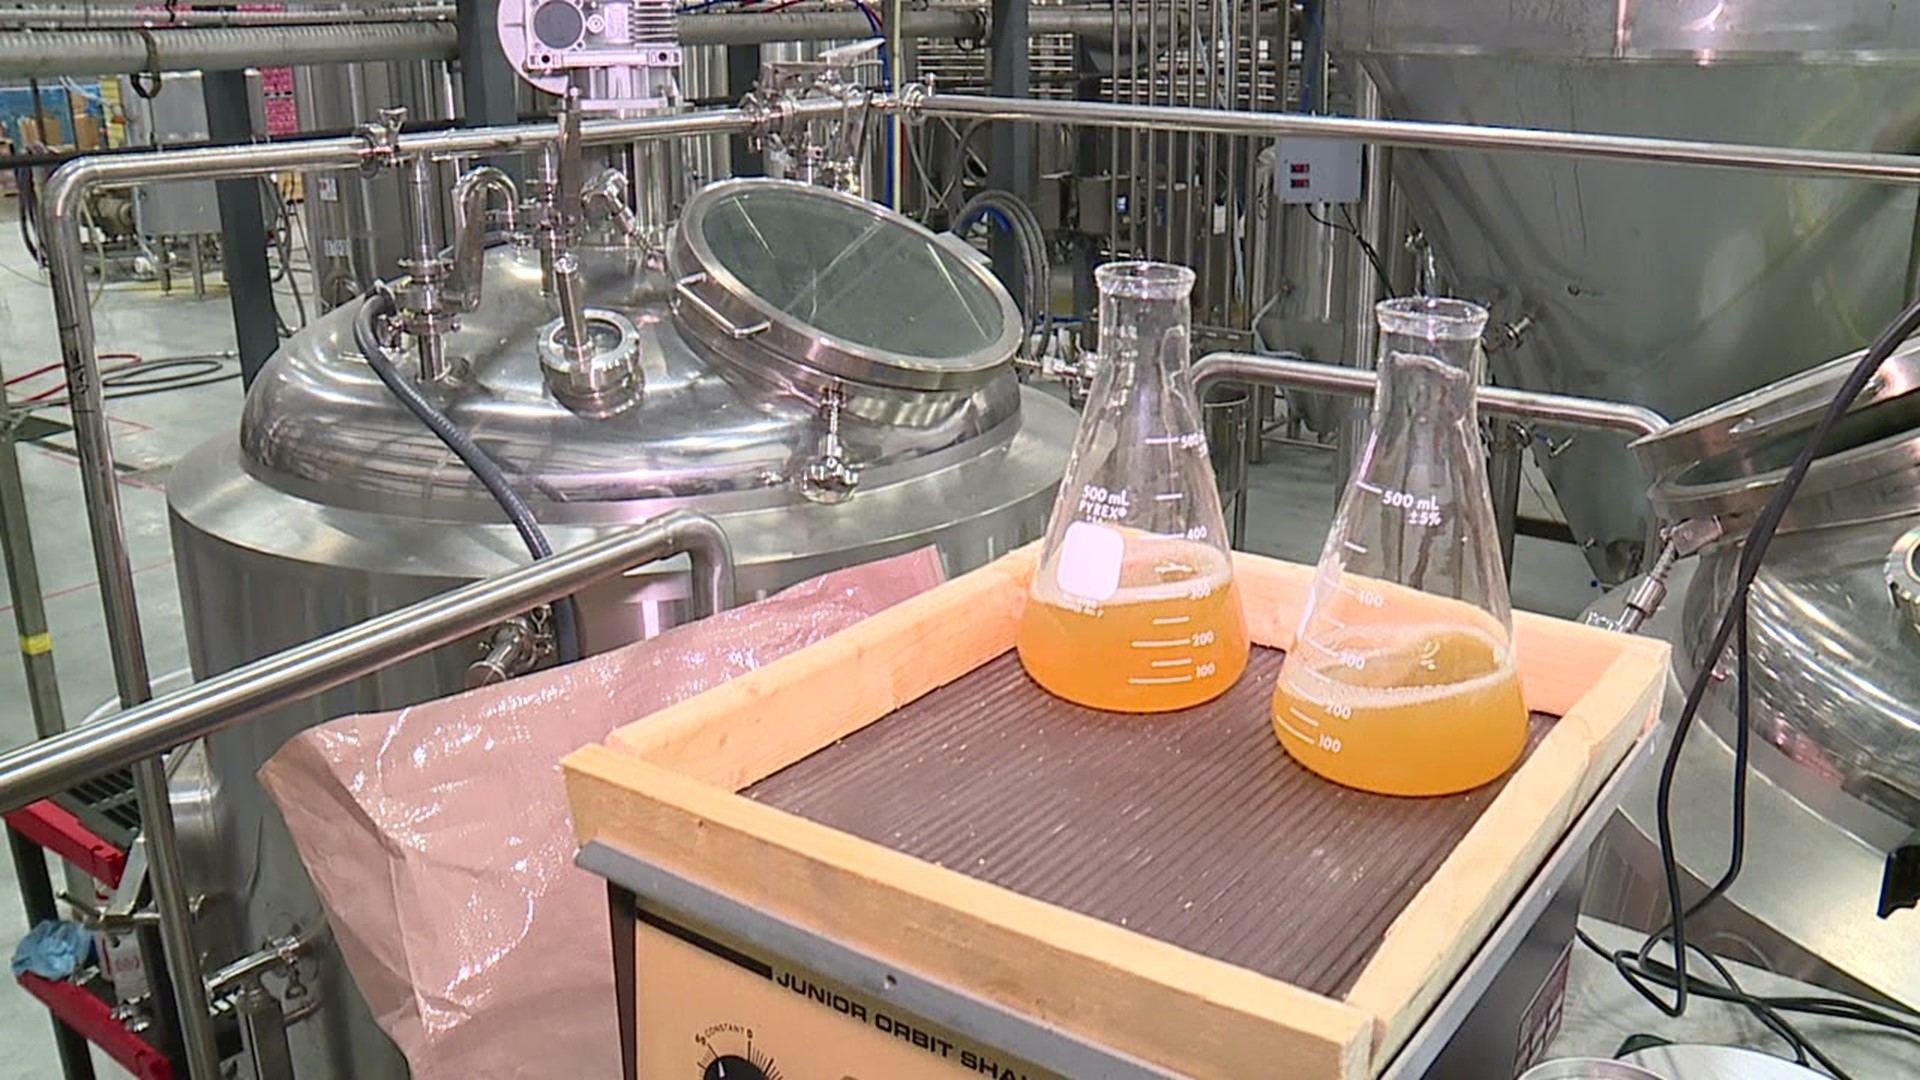 The science of beer – it's an actual major at Pennsylvania College of Technology in Williamsport.
It's only natural that the program is expanding into a brewery.